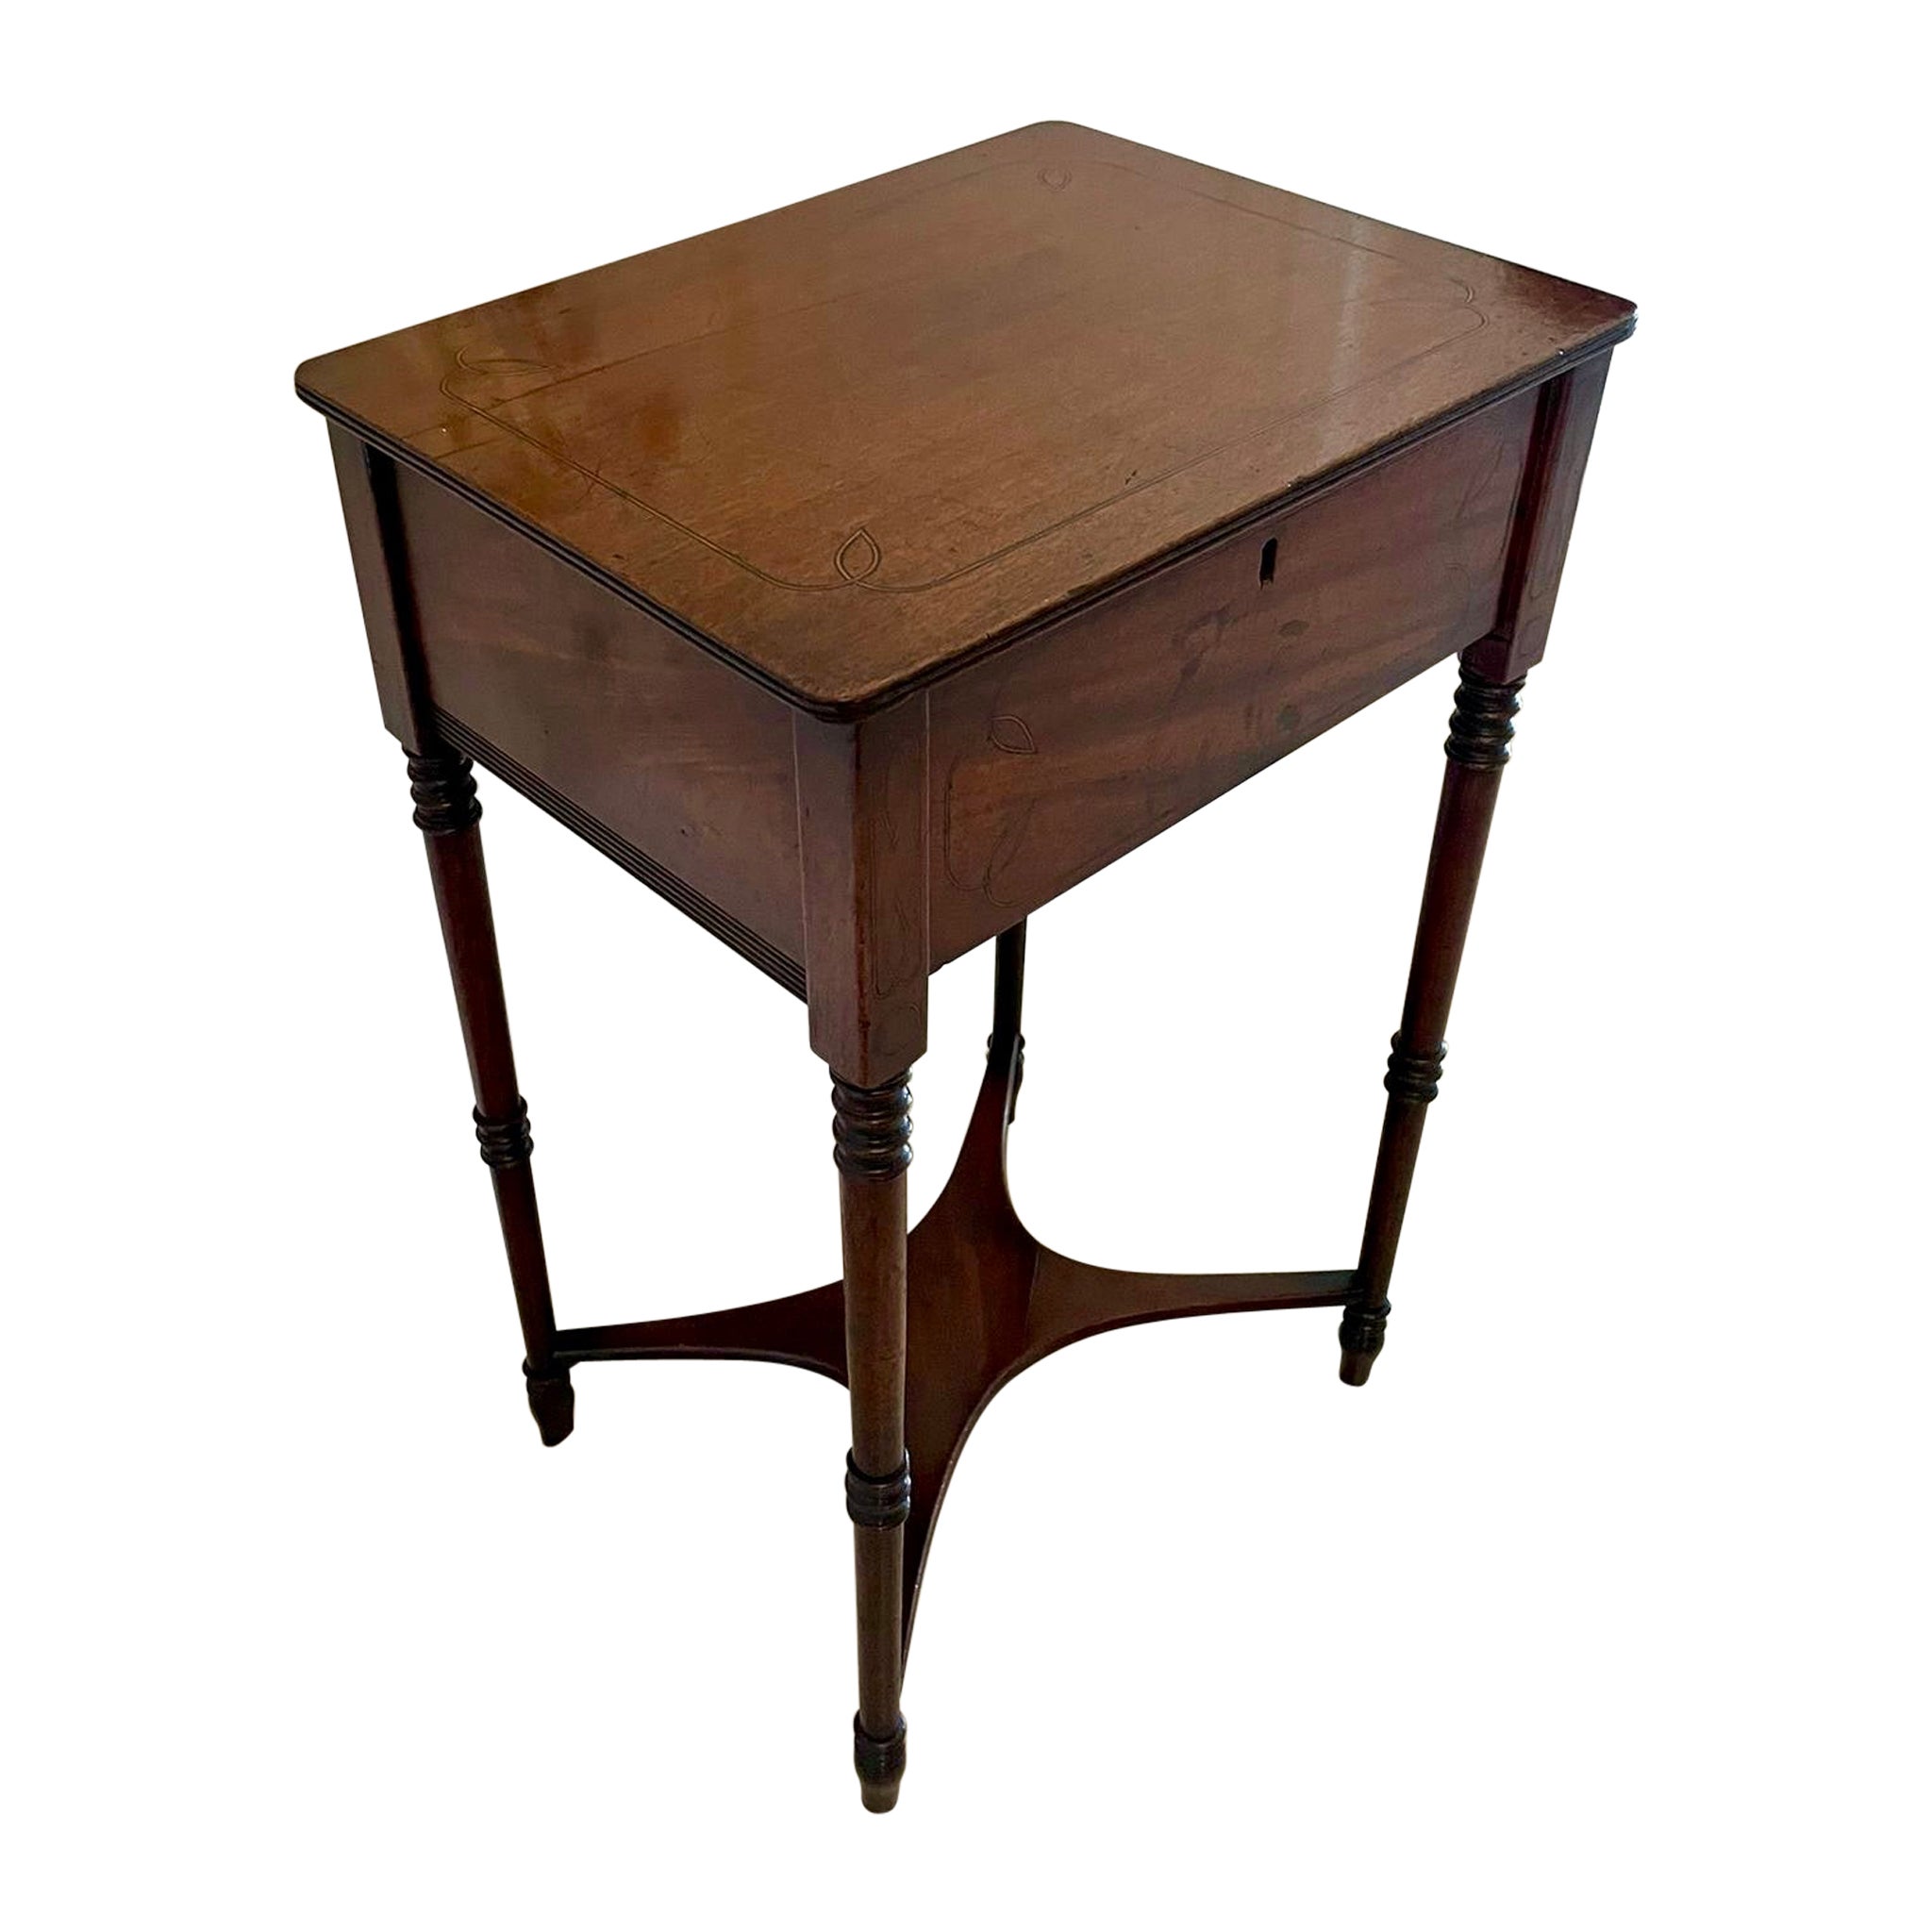 Antique Regency Freestanding Quality Mahogany Inlaid Lamp Table  For Sale